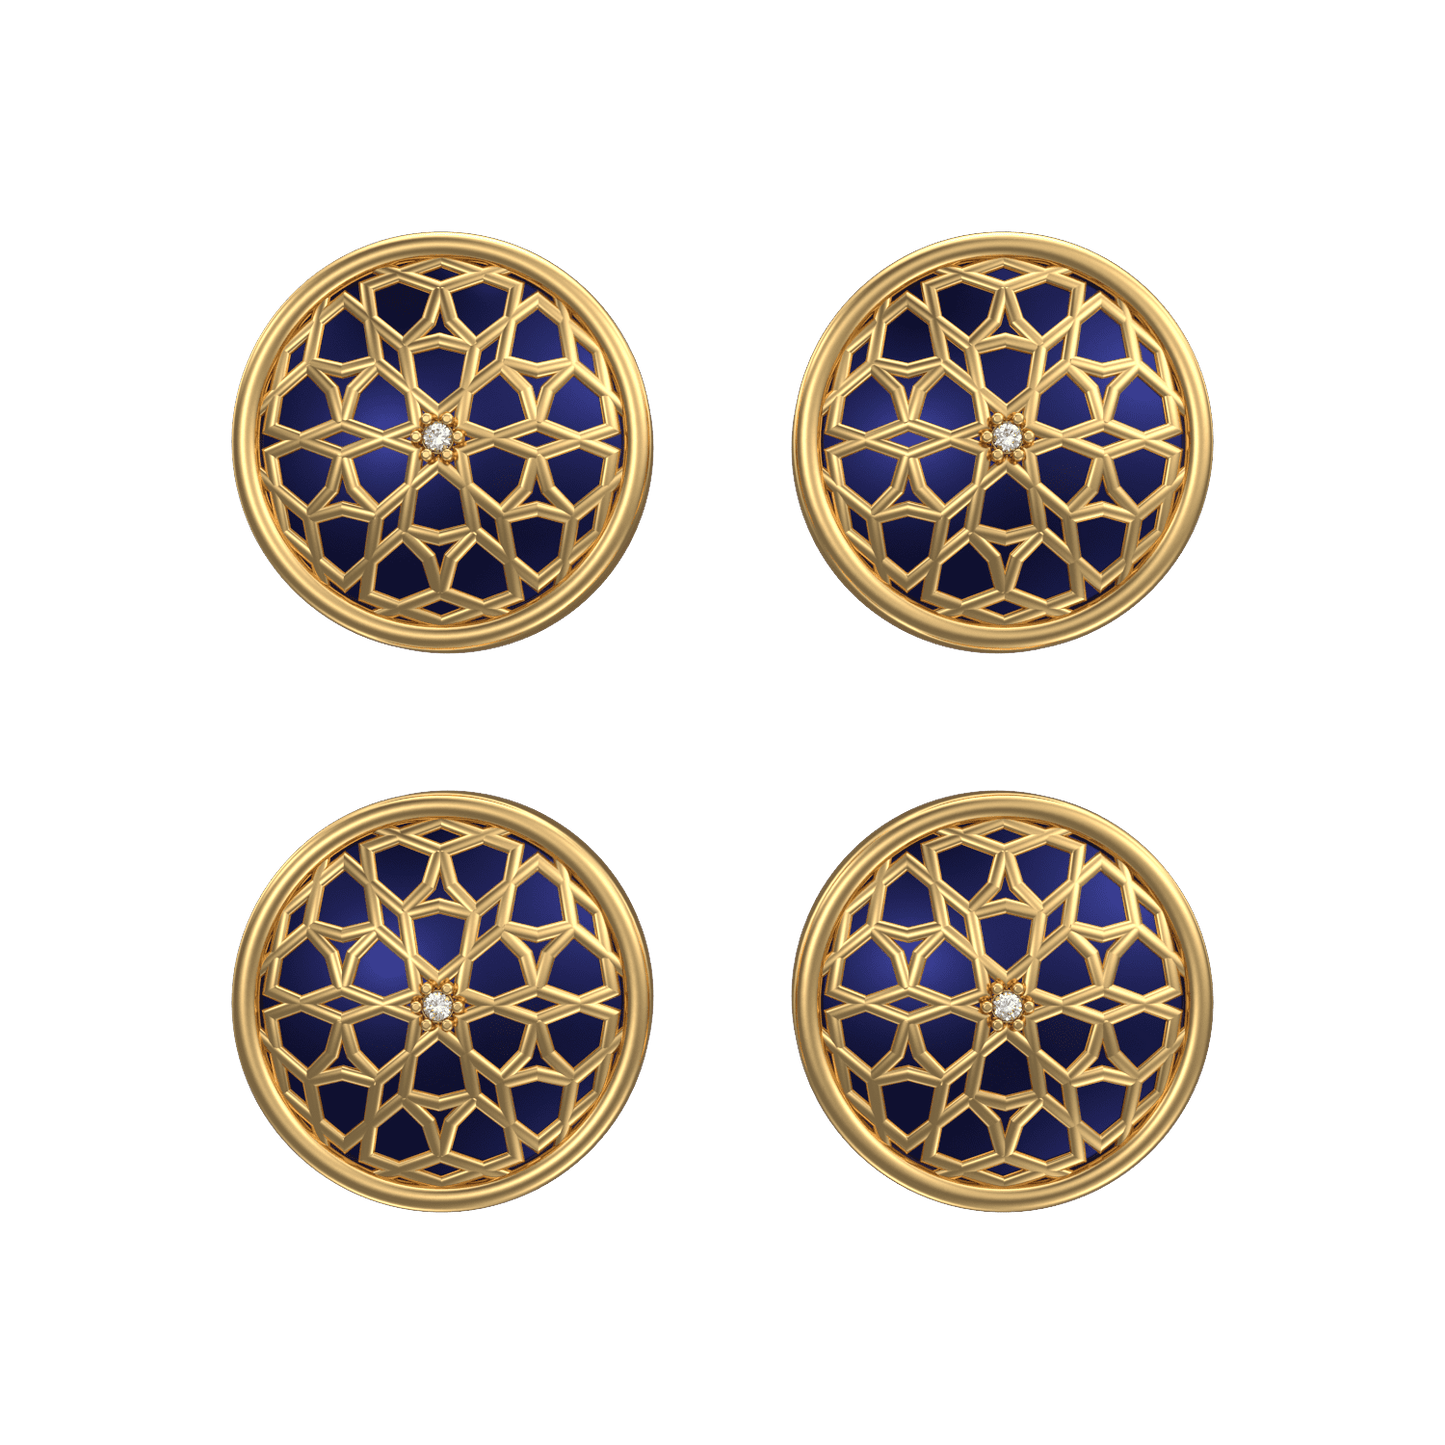 Starburst Luxe, Classic Kurta Button Set with CZ Diamonds, 18kt Gold Plating and Enamel.